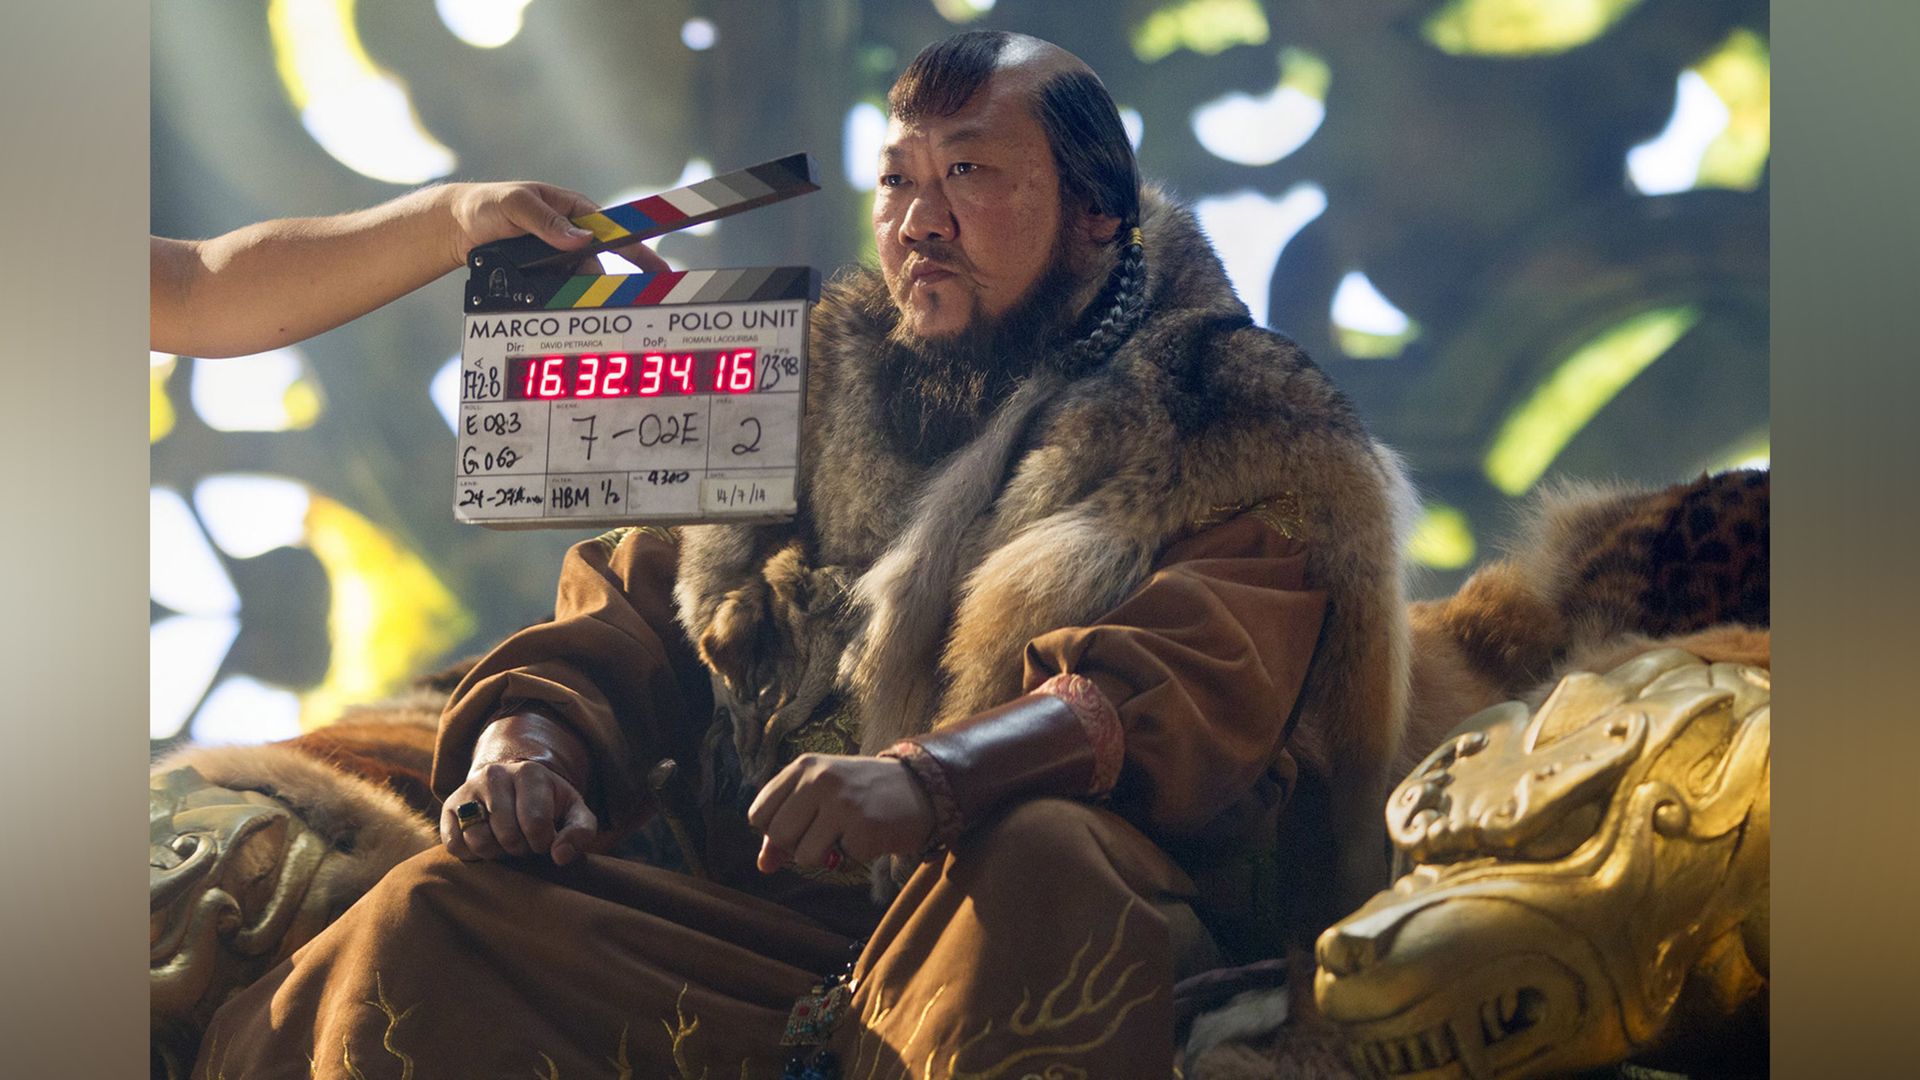 Benedict Wong on the set of the series Marco Polo